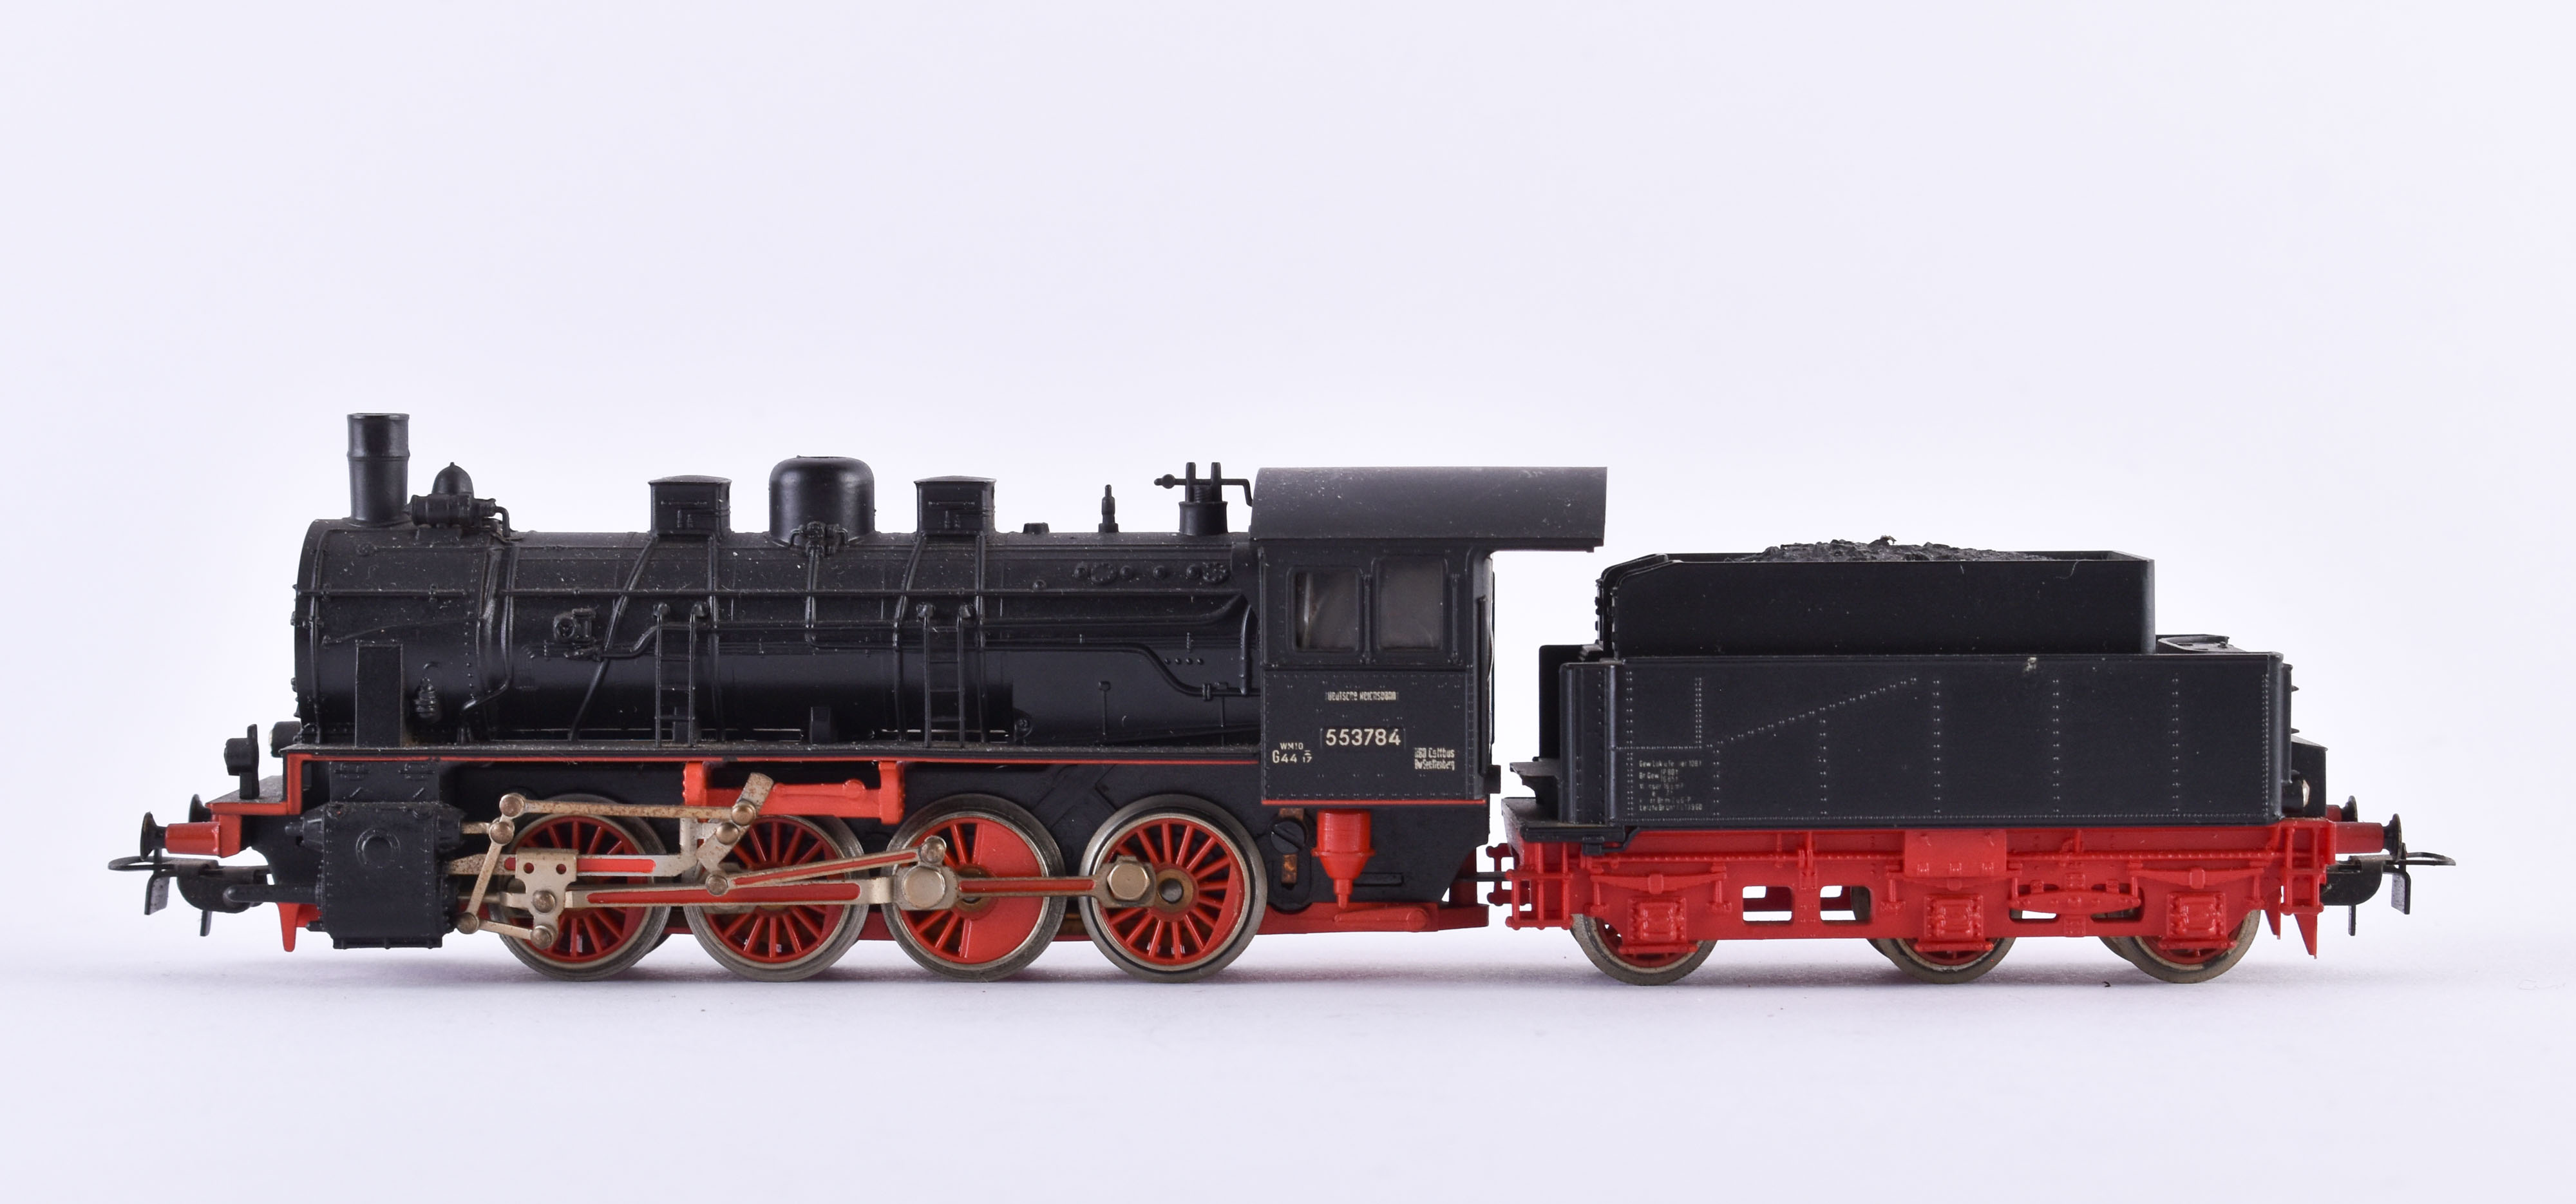 Steam locomotive with tender BR 553784 DR - Piko - Image 2 of 3